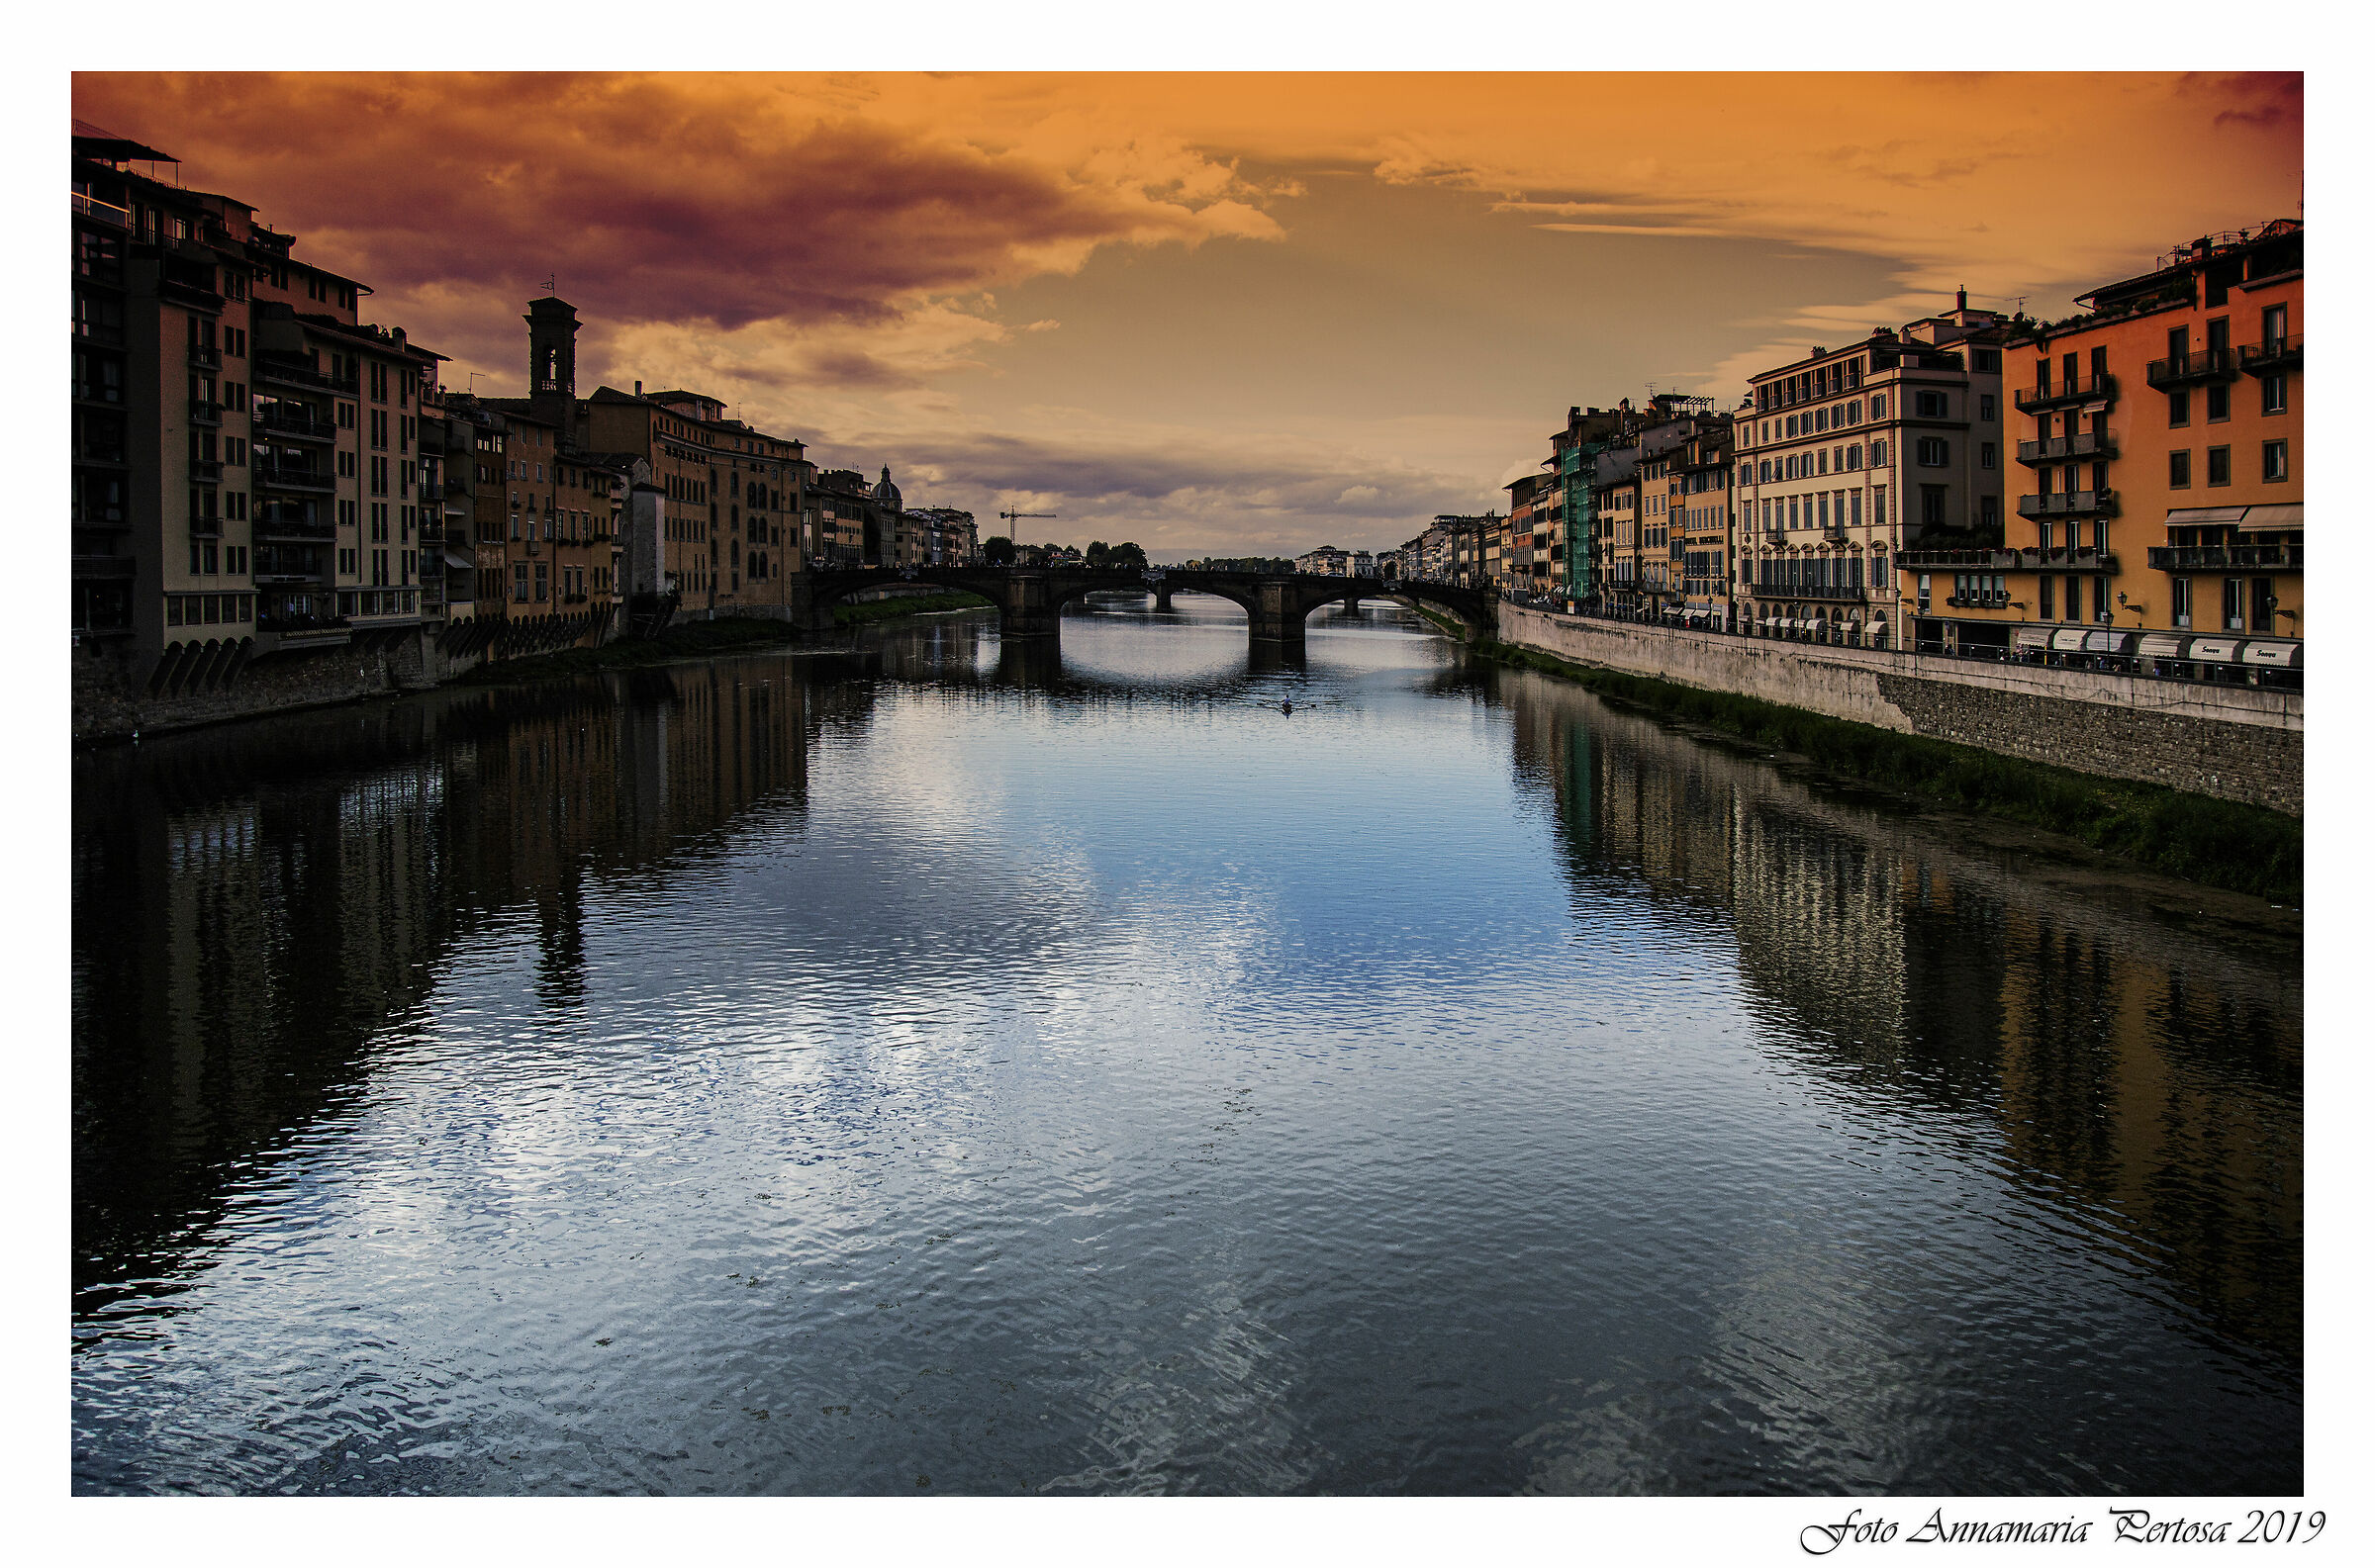 The charm of a Florentine sunset...